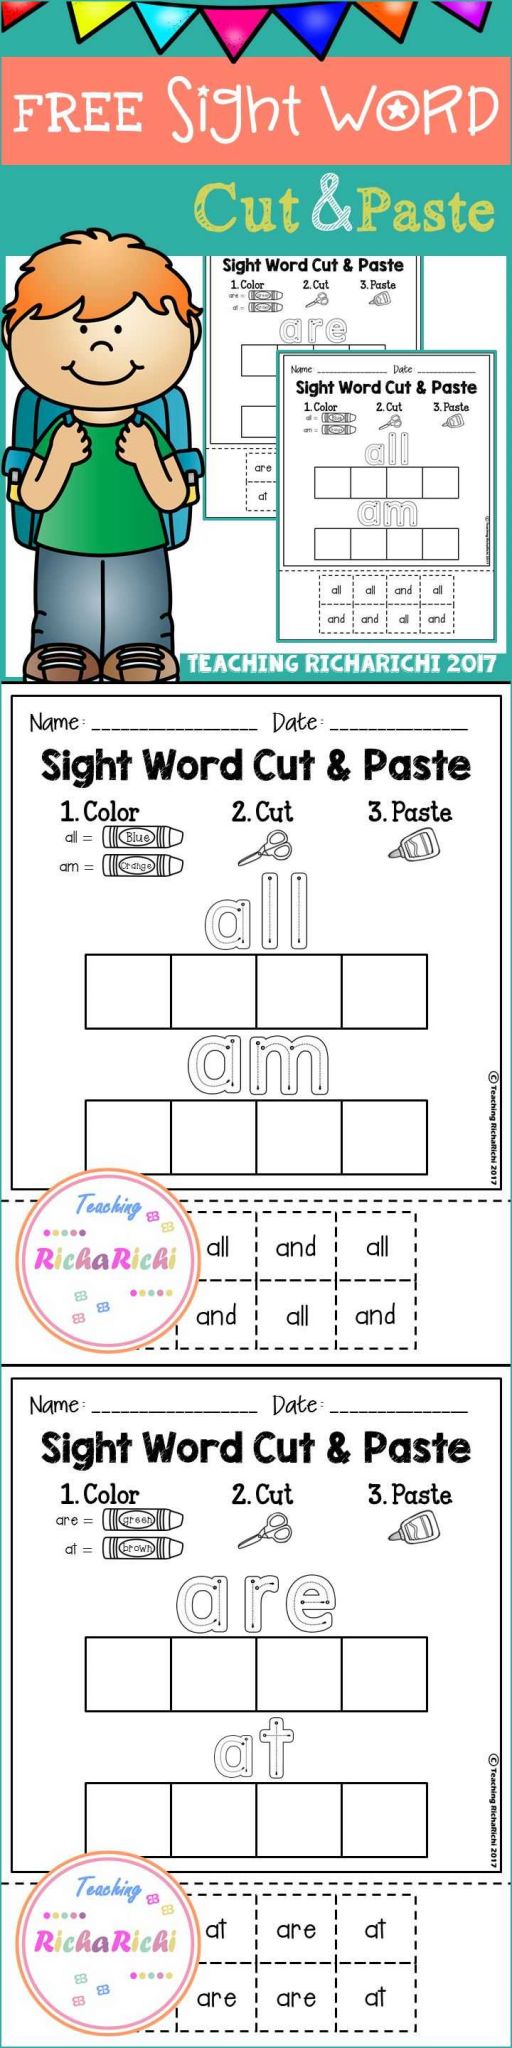 Body Beast Worksheets Along with 91 Best Teaching Richarichi Products Images On Pinterest